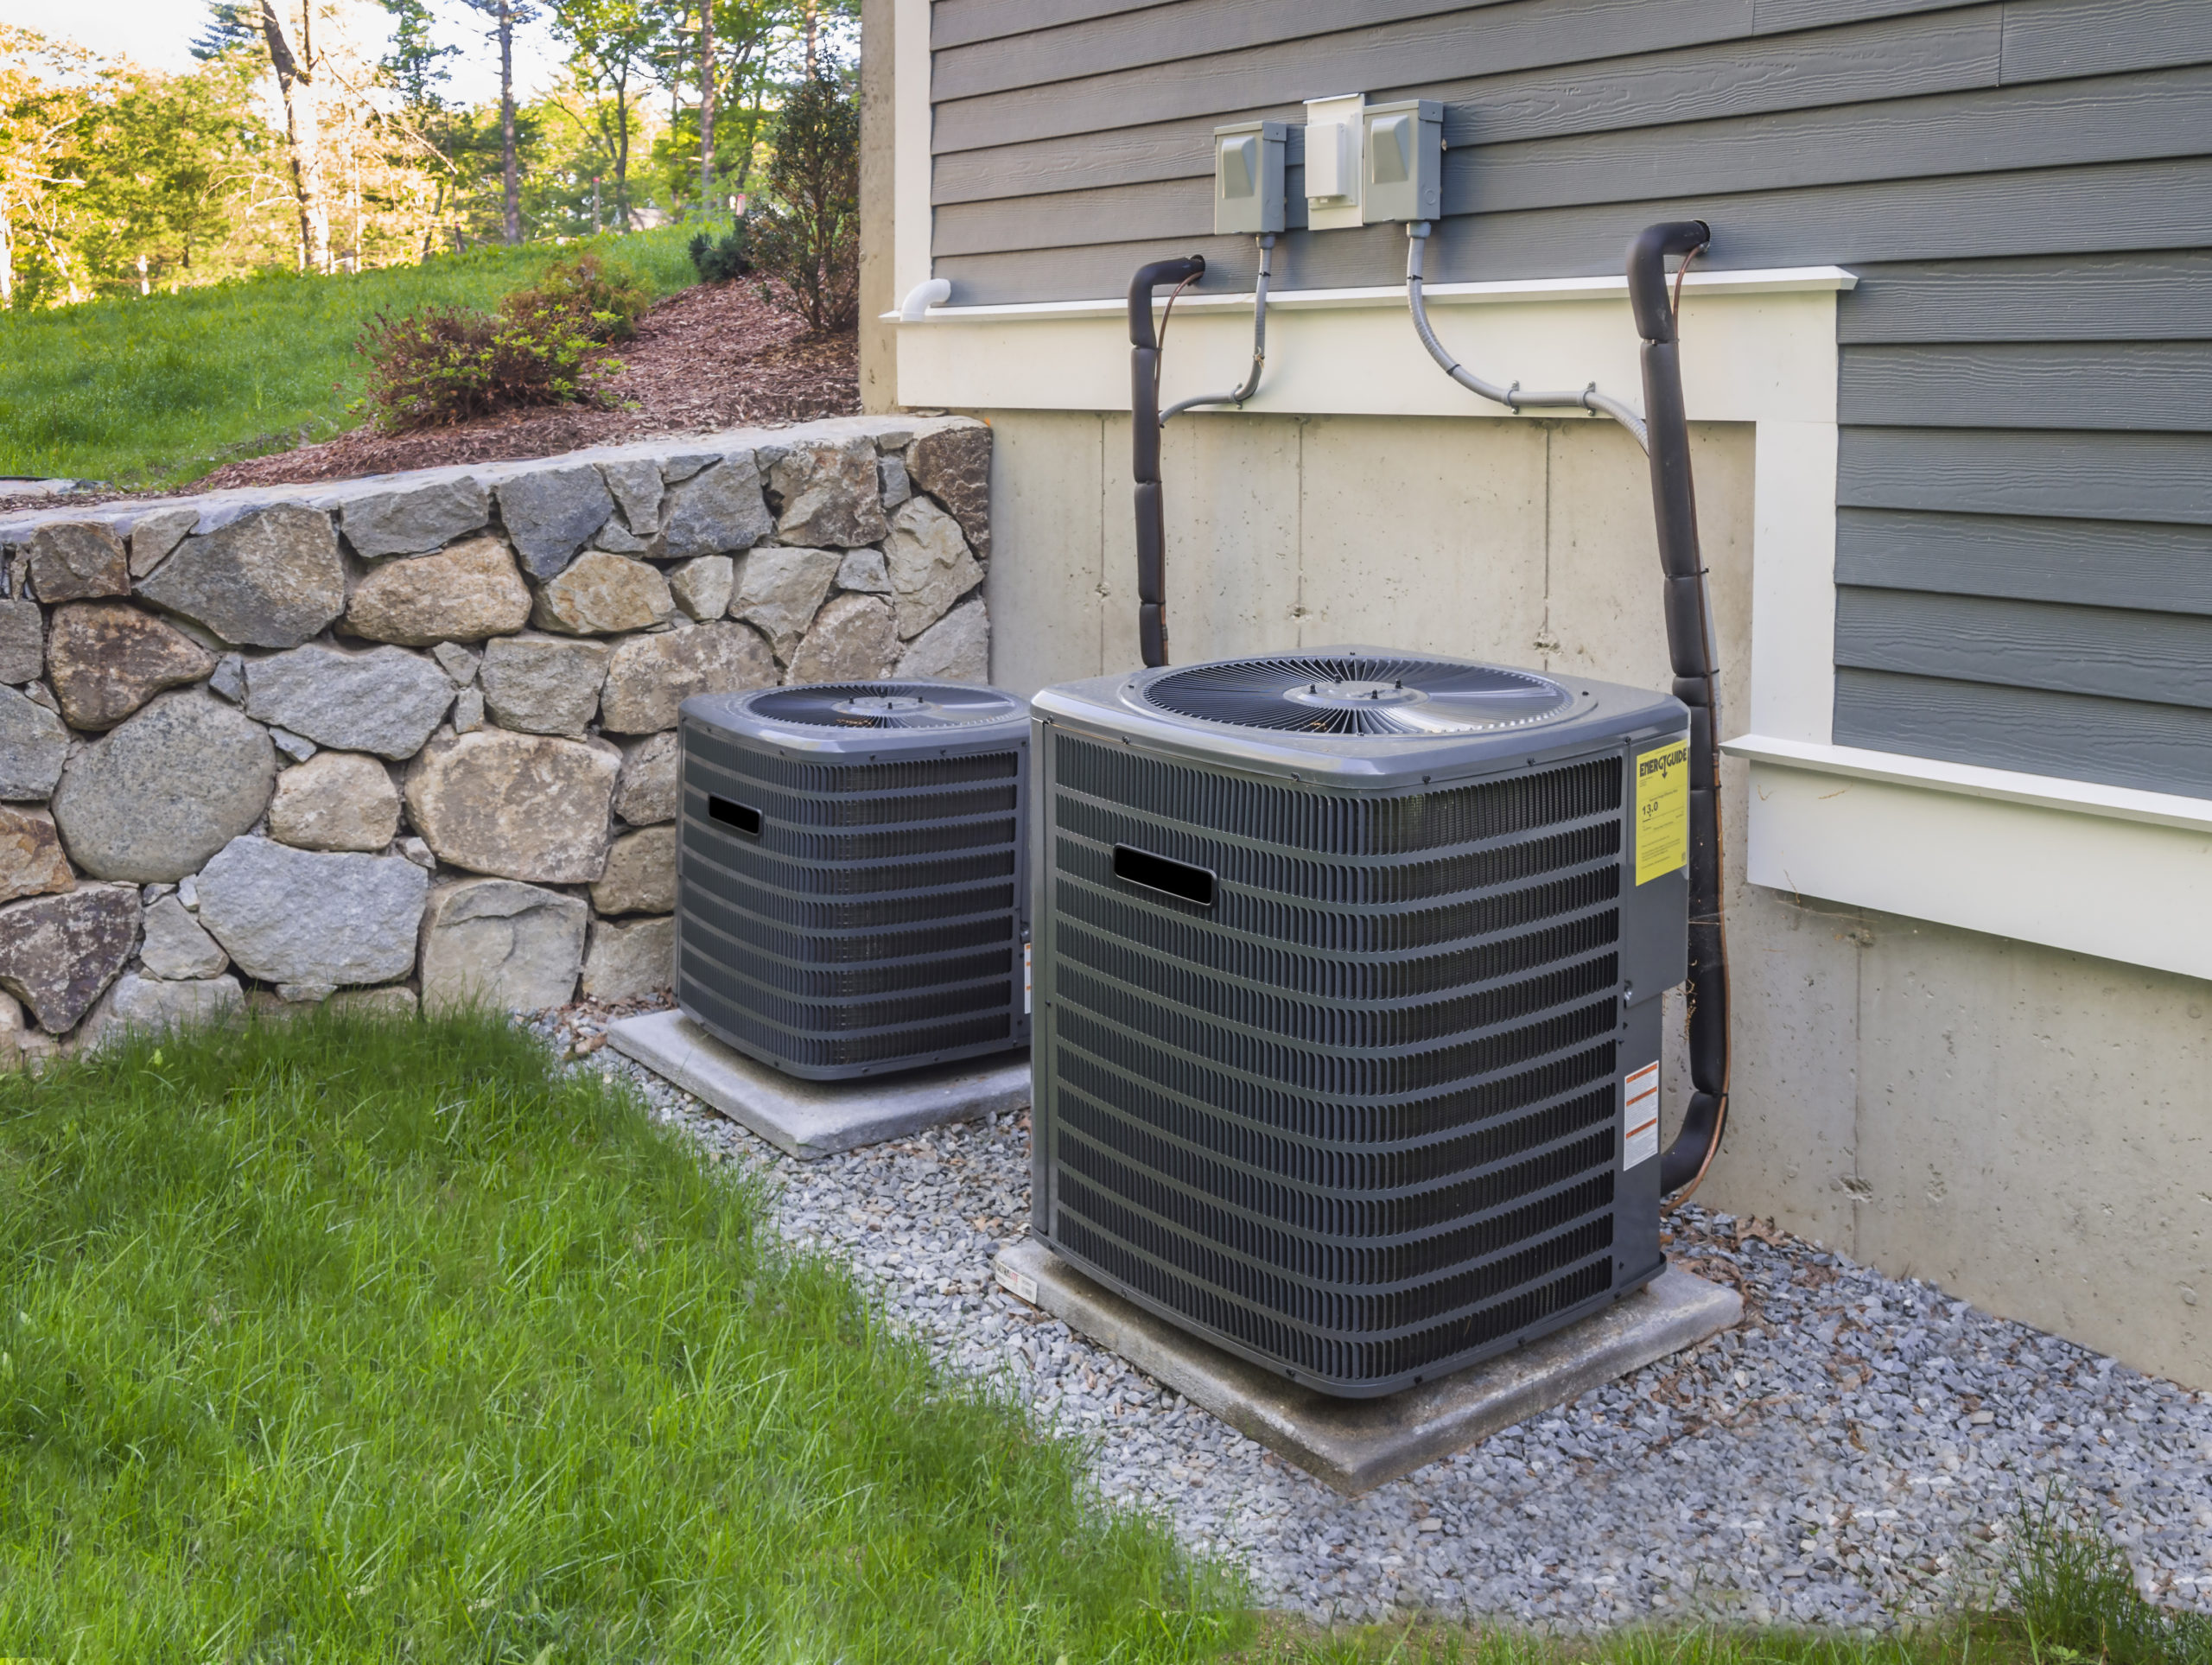 How to Maintain Your HVAC System and Keep You Home Cool This Summer